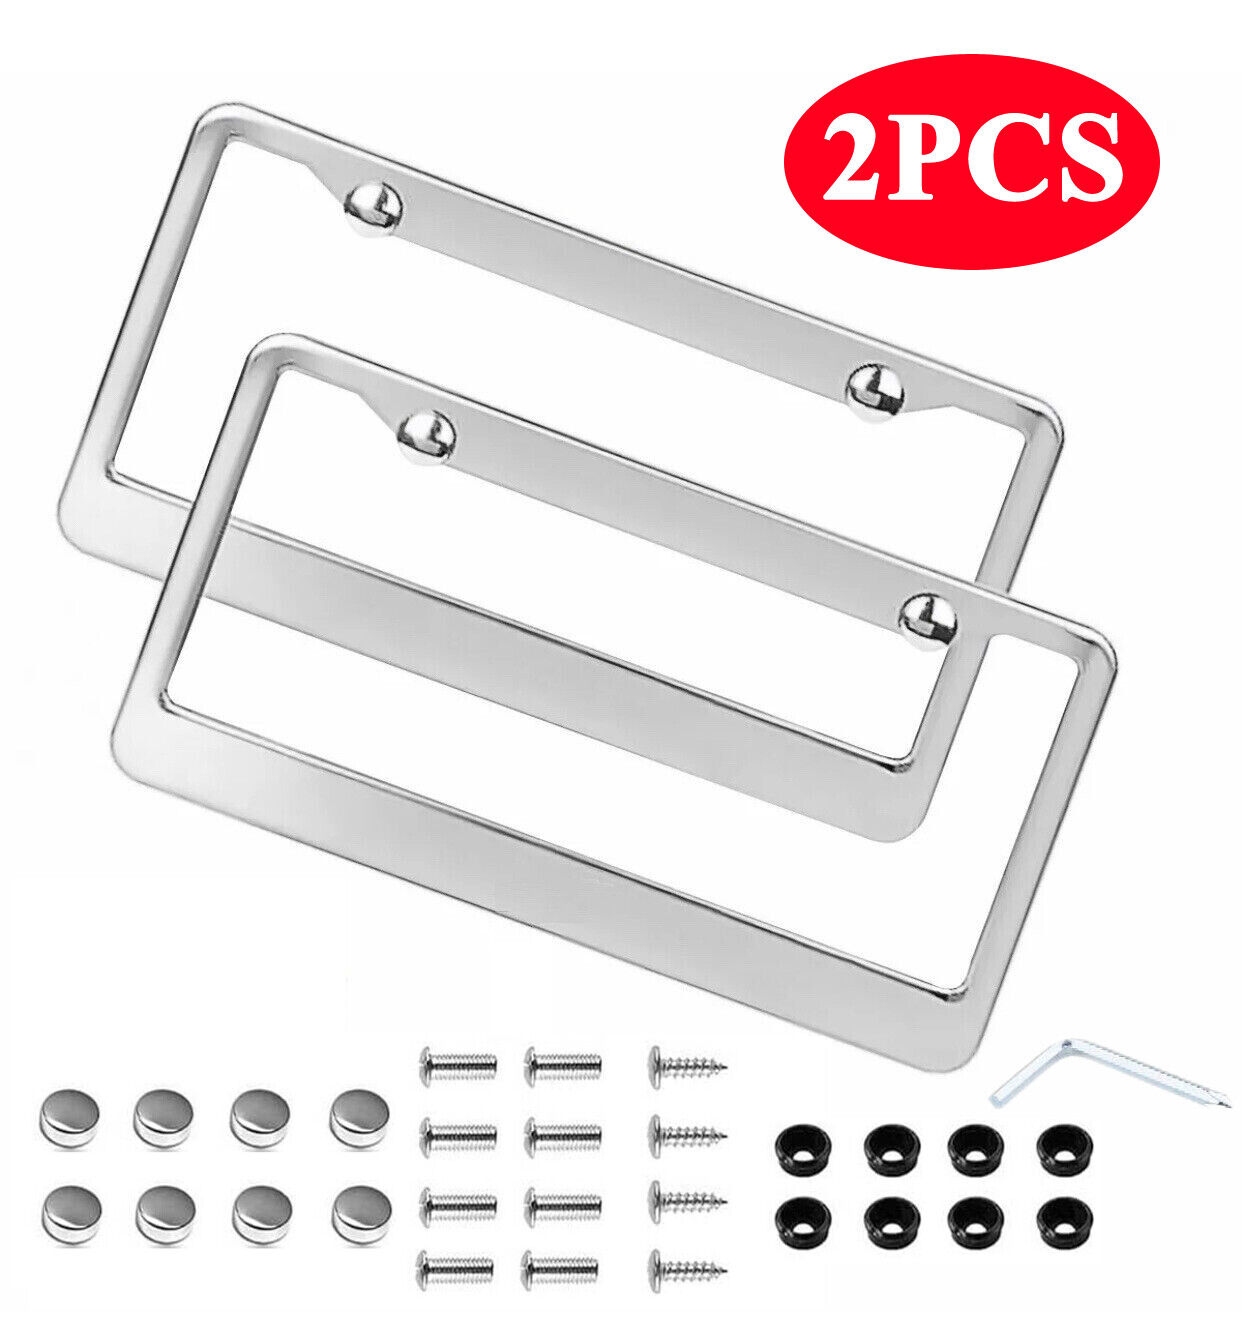 2PCS Chrome 304 Stainless Steel Metal License Plate Frames Tag Cover Clear New